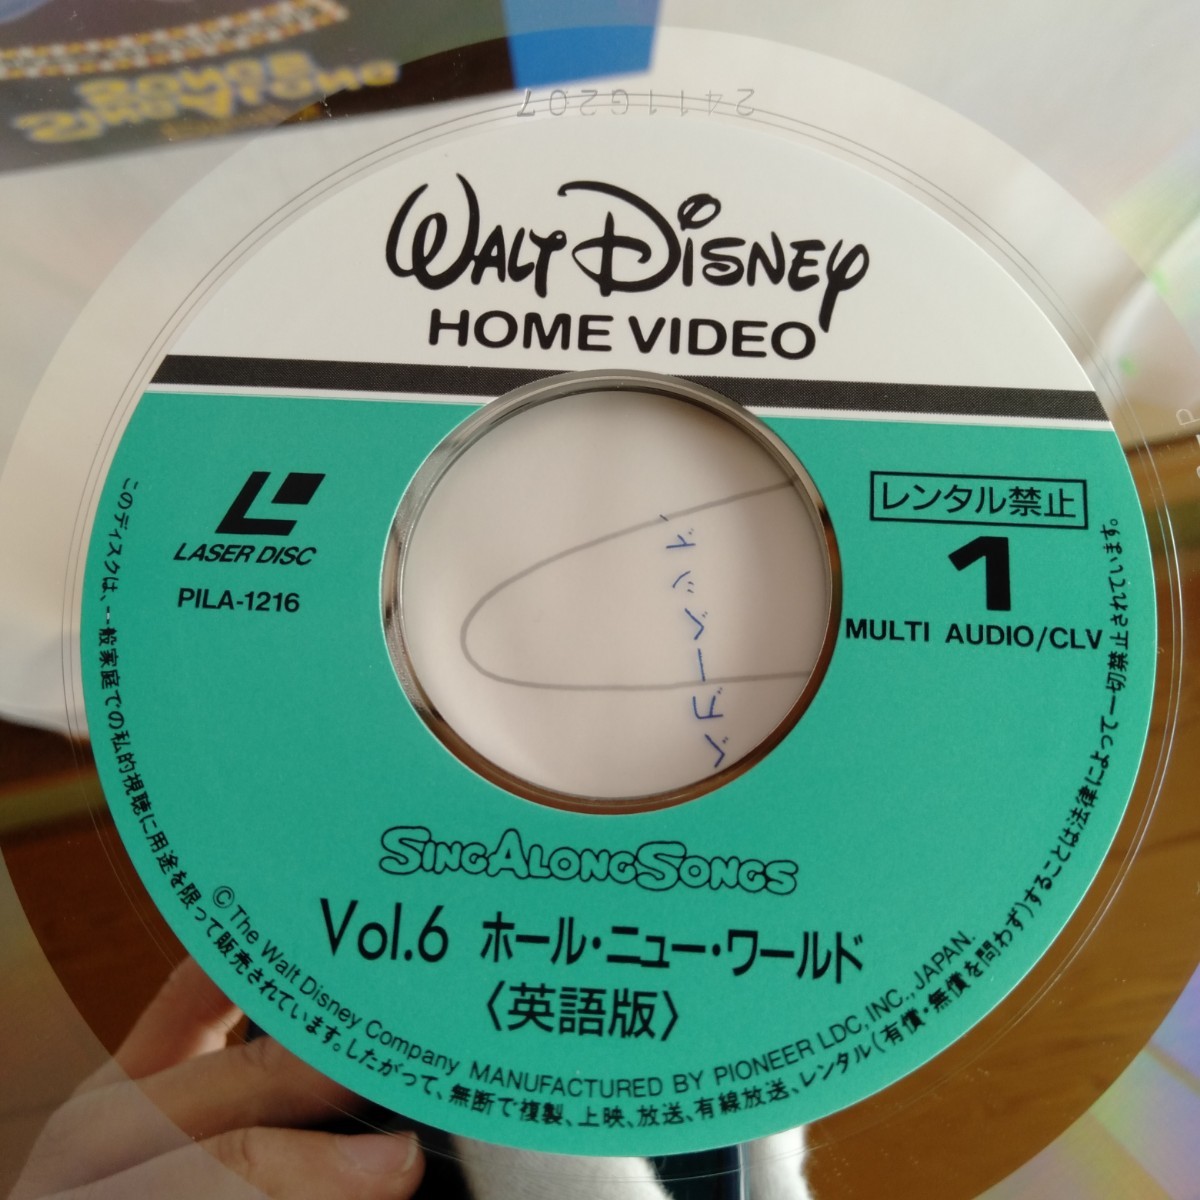 ta650 SING ALONGSONGS Vol.6 hole * new * world Disney Japanese title laser disk LD what sheets also uniform carriage 1,000 jpy reproduction not yet verification 